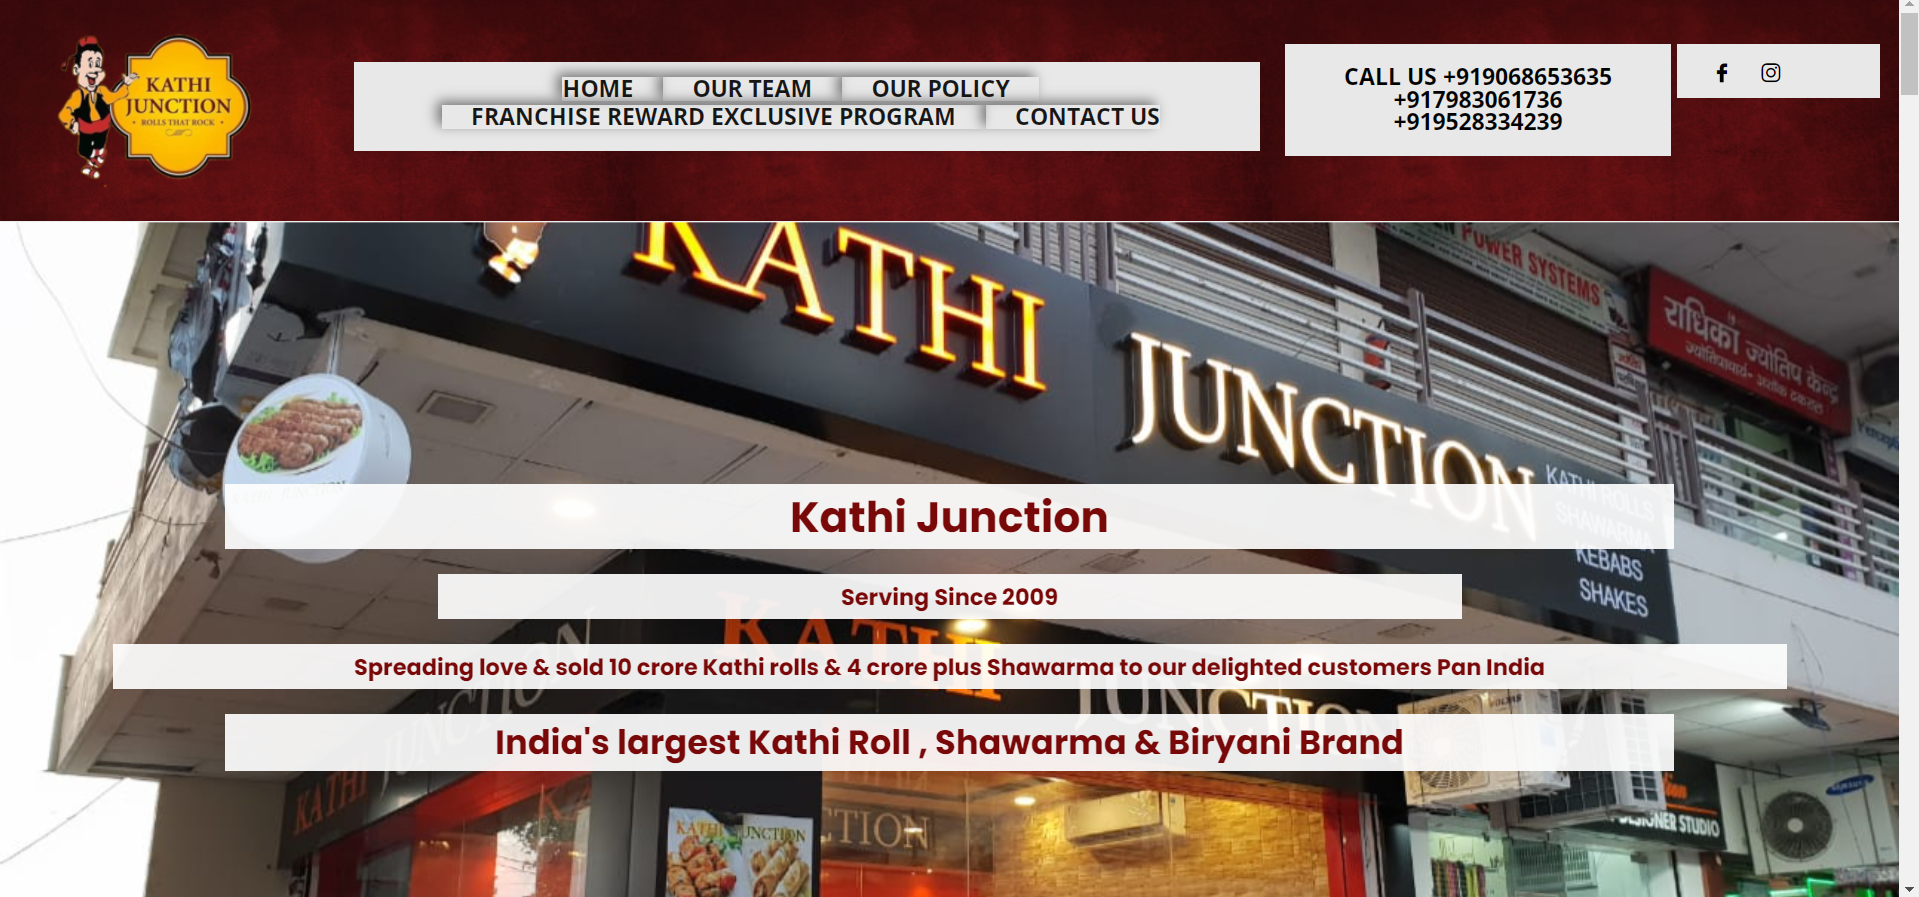 Kathi Junction, one of the best food franchise in india